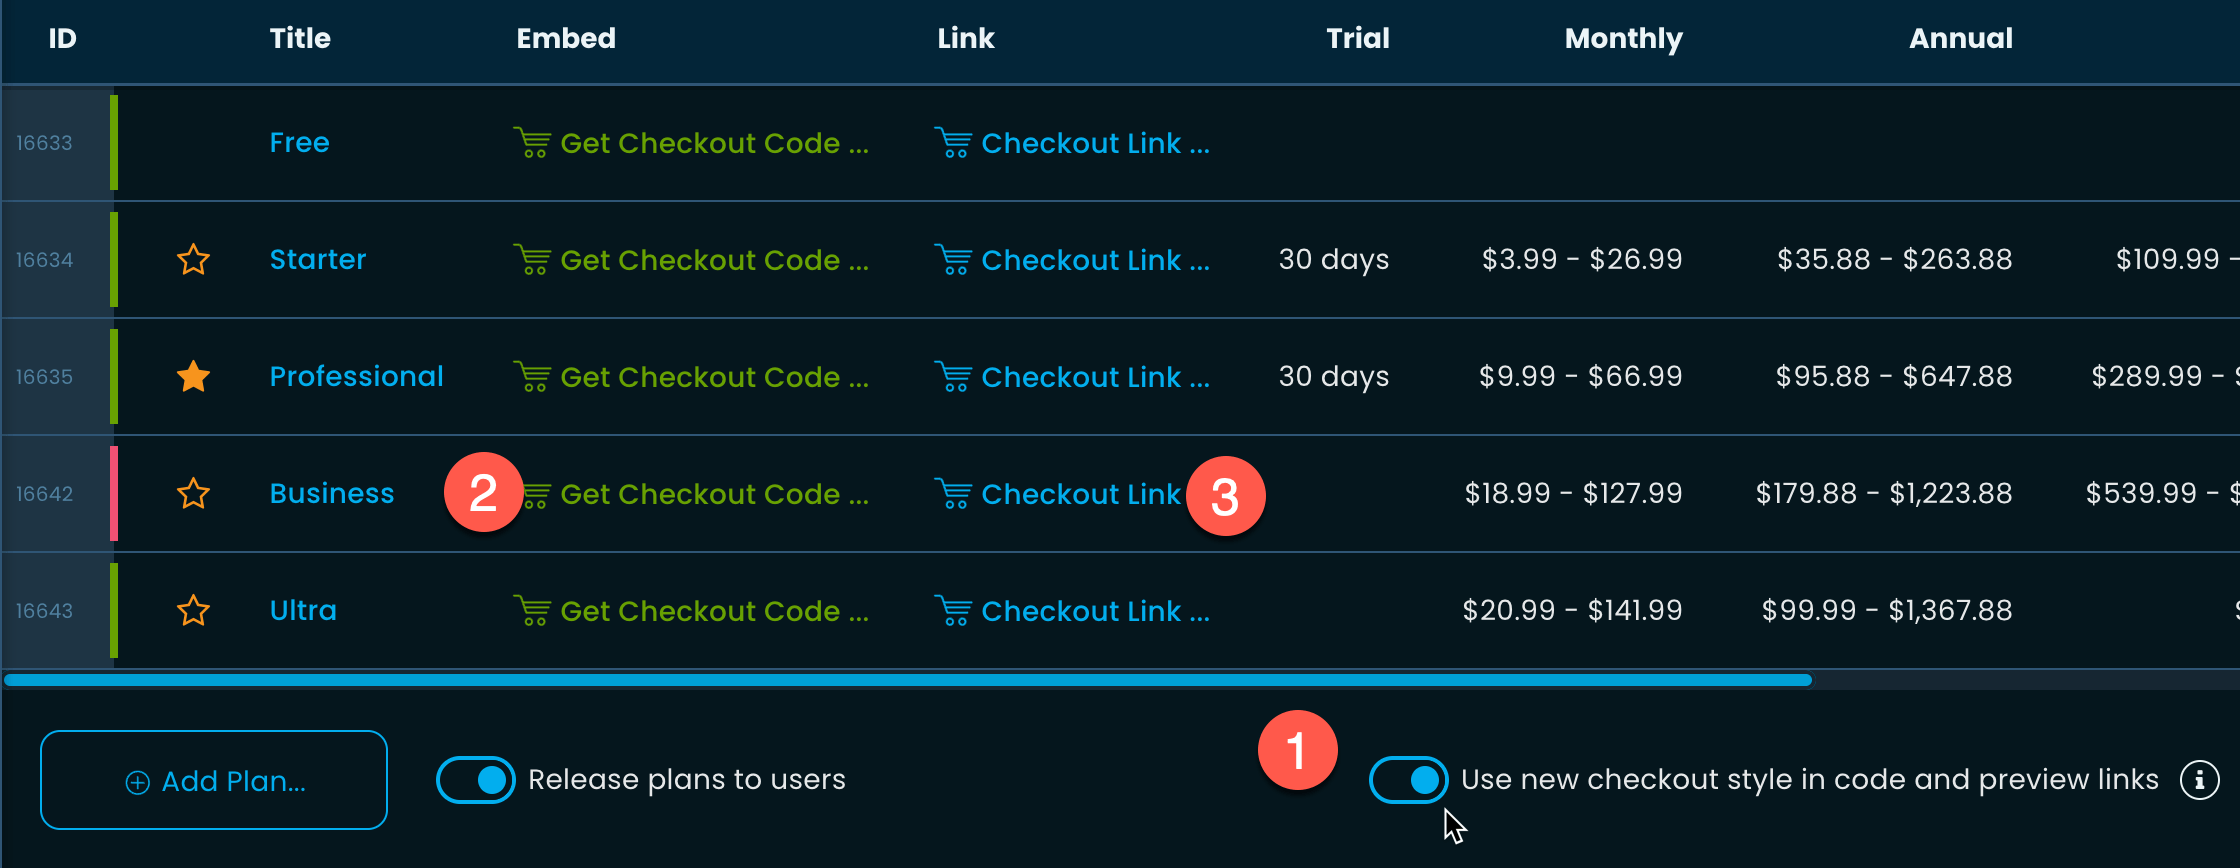 Enable preview links and code for the new Checkout Style from Freemius Developer Dashboard